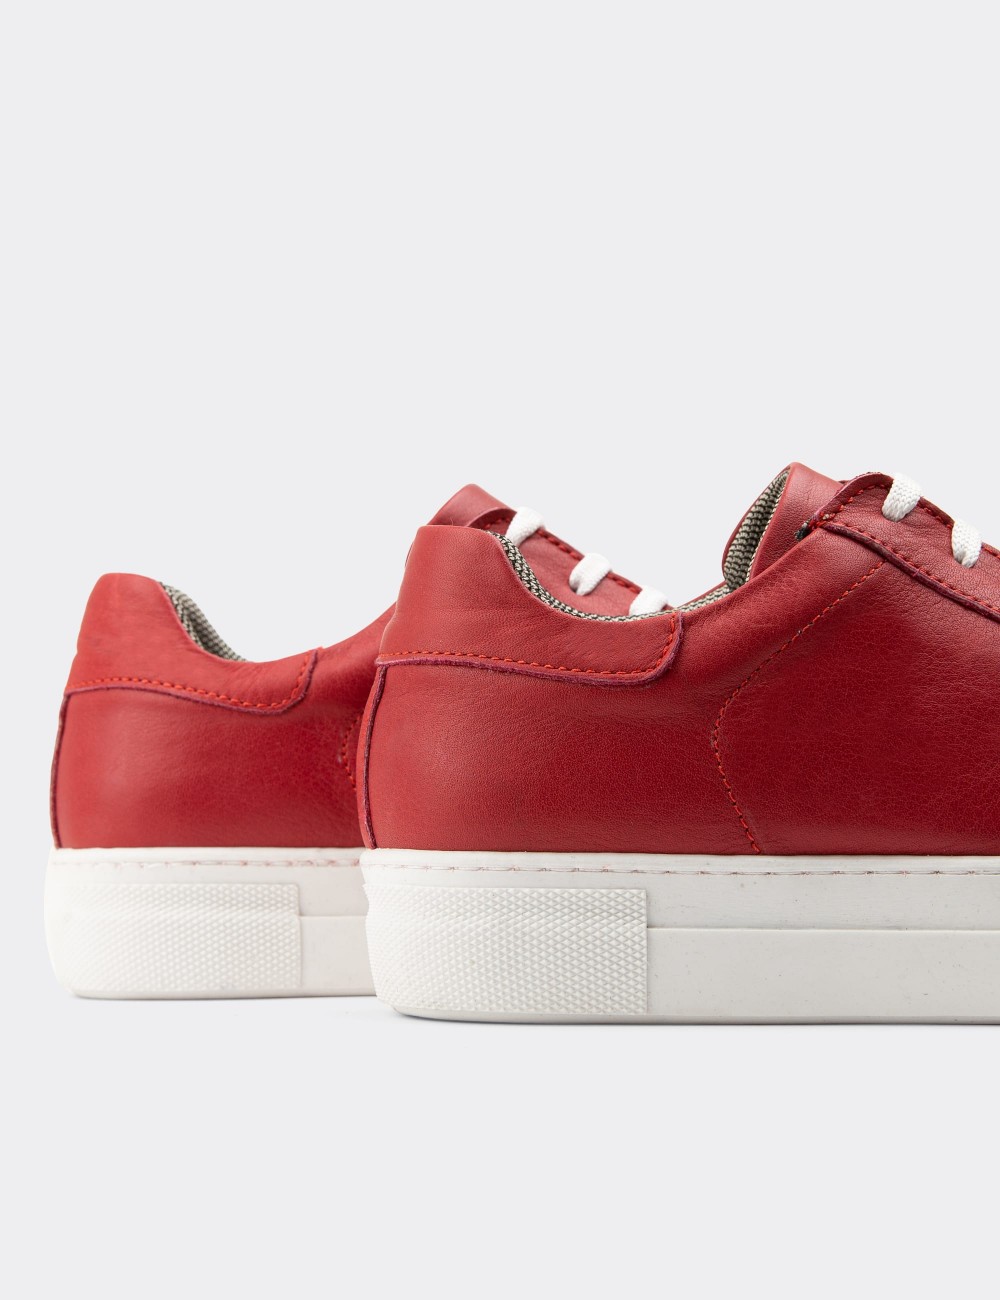 Red Leather Sneakers - Z1681ZKRMC02